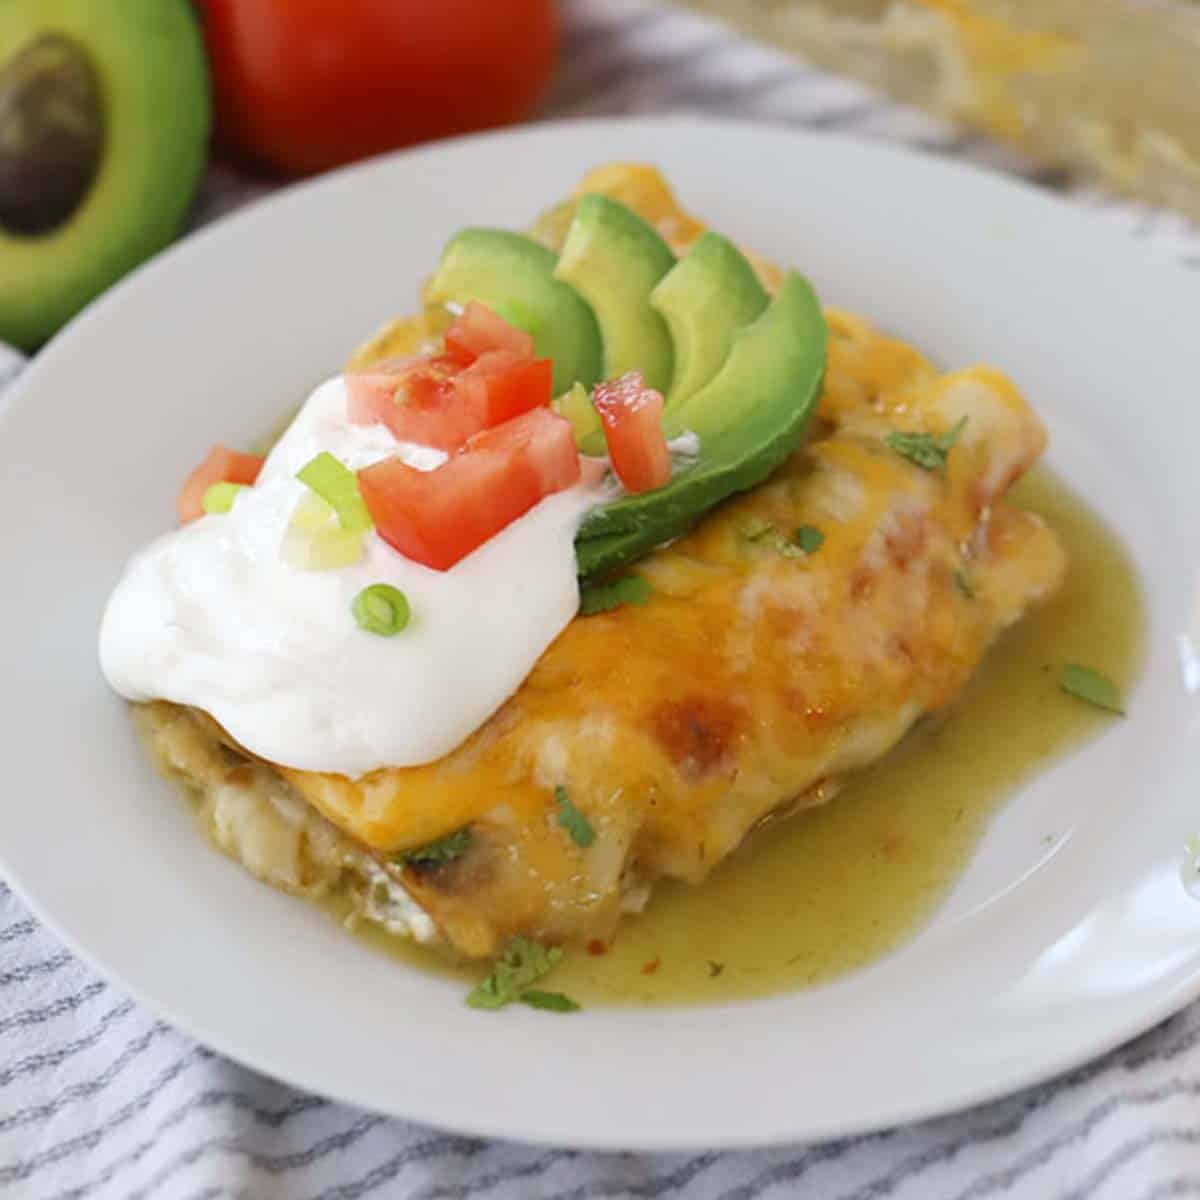 green chile chicken enchilada recipe topped with sour cream, avocados,and tomatoes, green chicken enchiladas cream cheese.